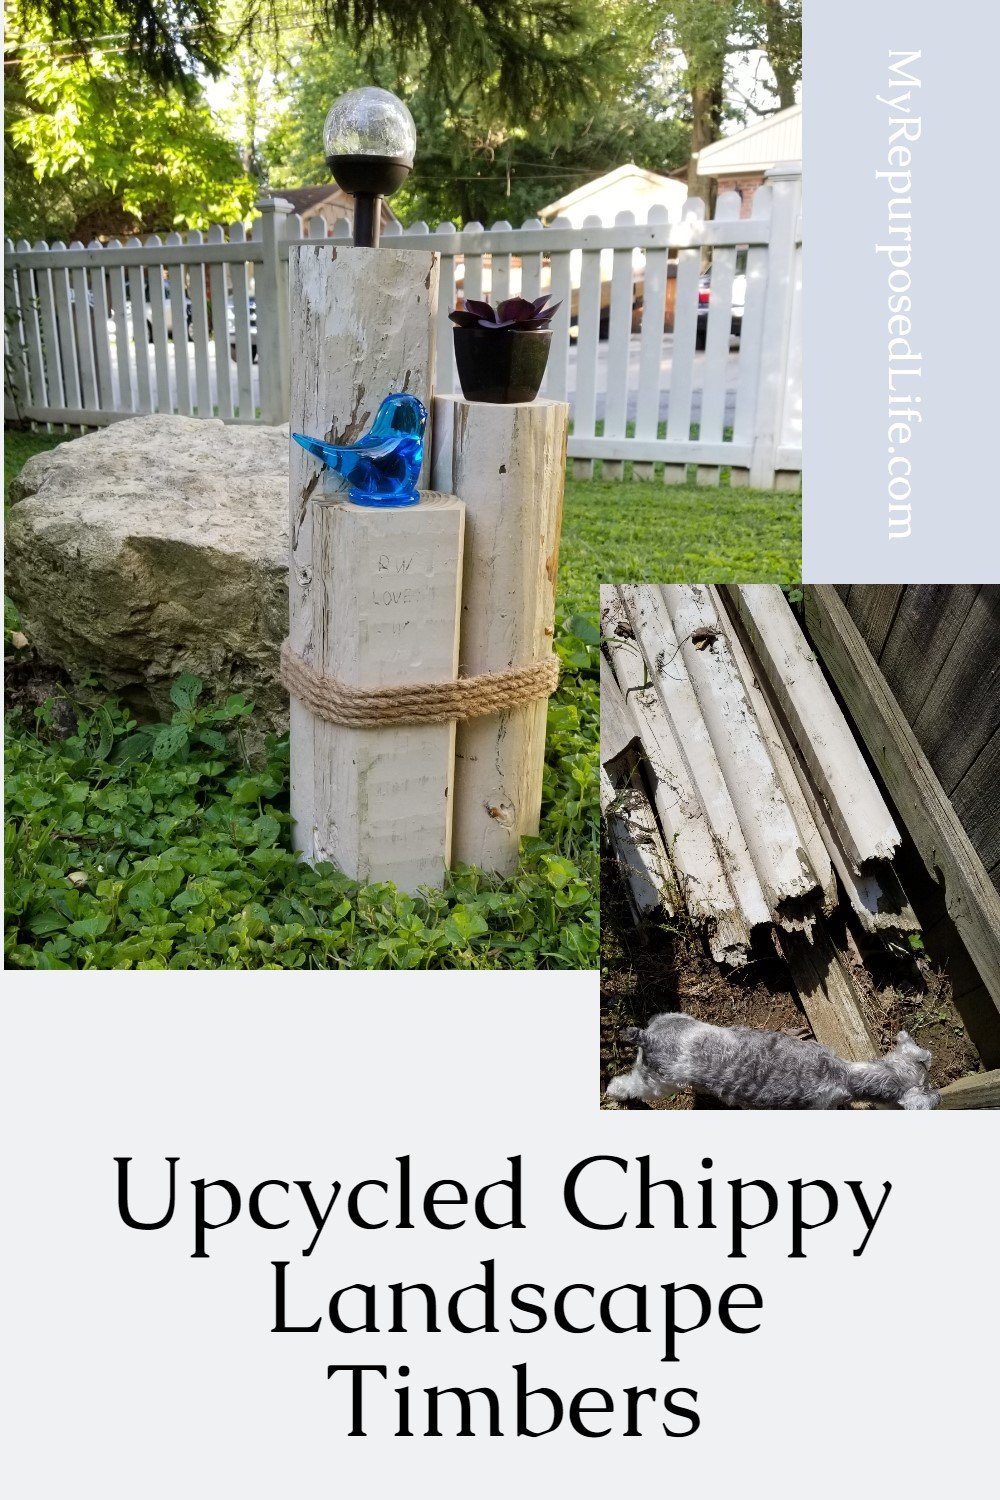 How to use reclaimed wood to make a landscape timber solar light. Easy step by step tutorial. This solar light is great for porch, patio or yard. #repurposed #MyRepurposedLife #reclaimed #landscapetimber #solarlight via @repurposedlife